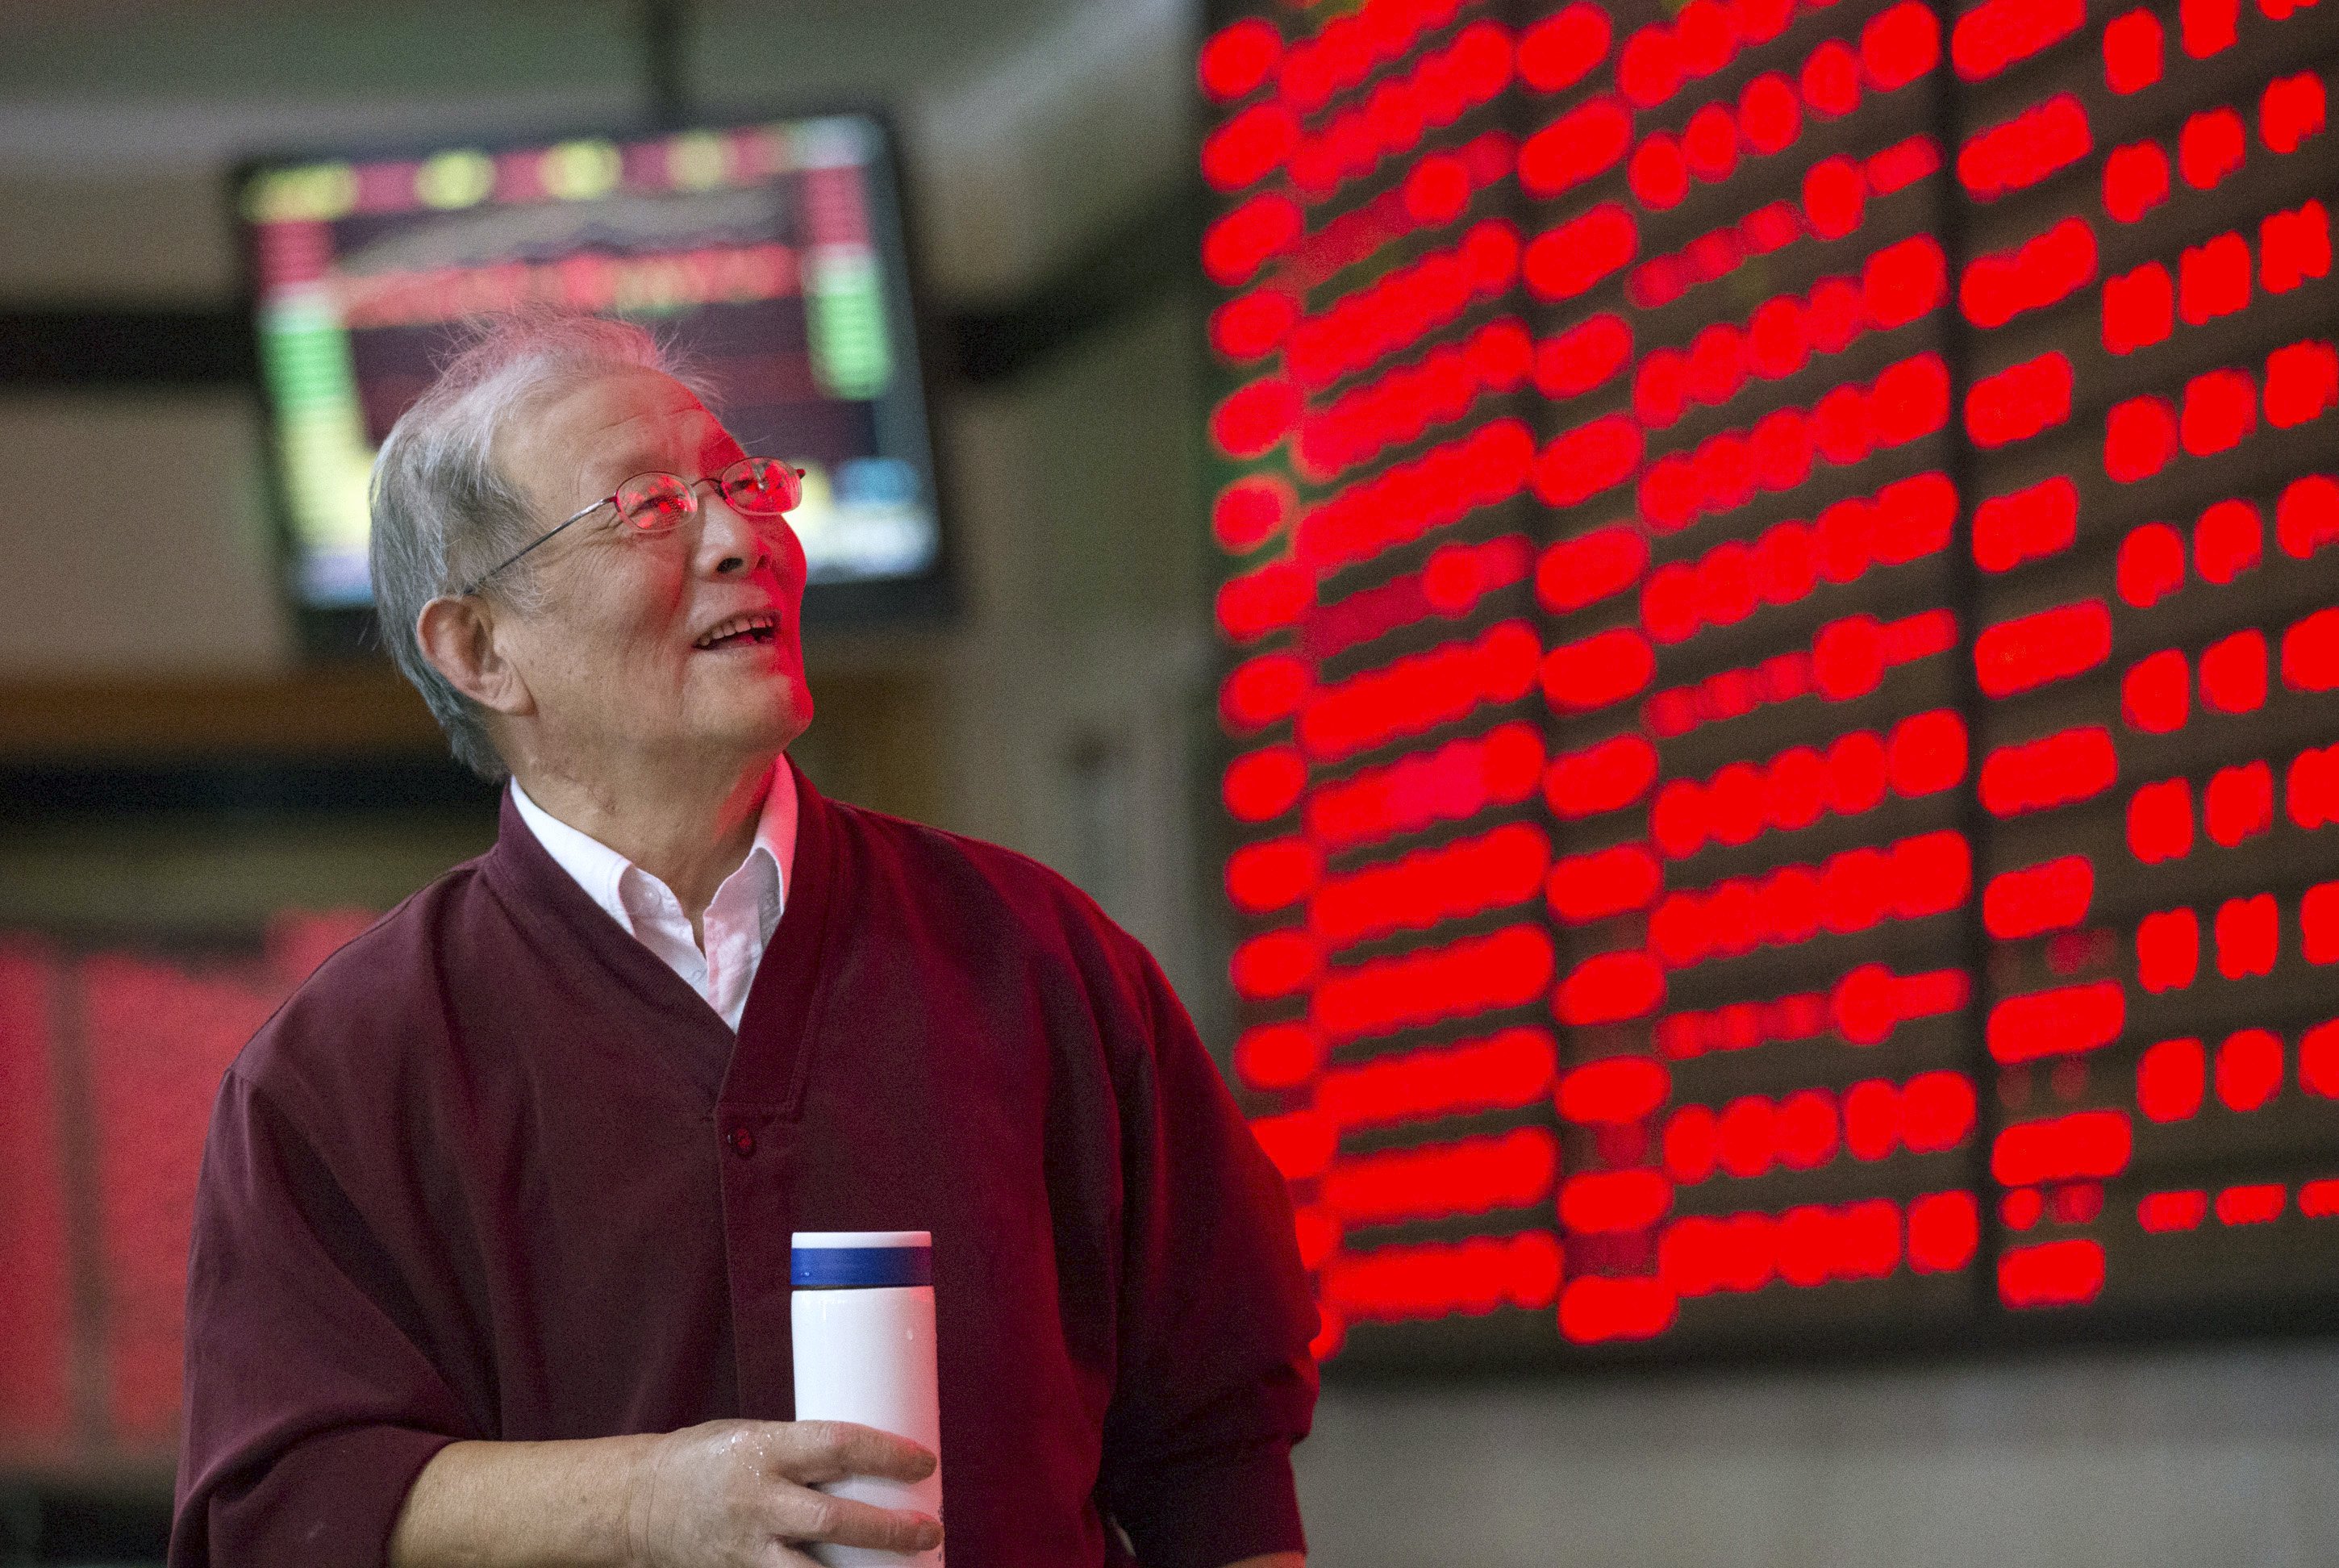 An investor looks at an electronic board showing stock information at a brokerage house in Nanjing, Jiangsu province, China, October 12, 2015. China shares jumped over 3 percent on Monday to their highest level in seven weeks after the central bank took fresh steps to inject liquidity into the struggling economy and said the stock market's correction "is almost over". REUTERS/China Daily CHINA OUT. NO COMMERCIAL OR EDITORIAL SALES IN CHINA.